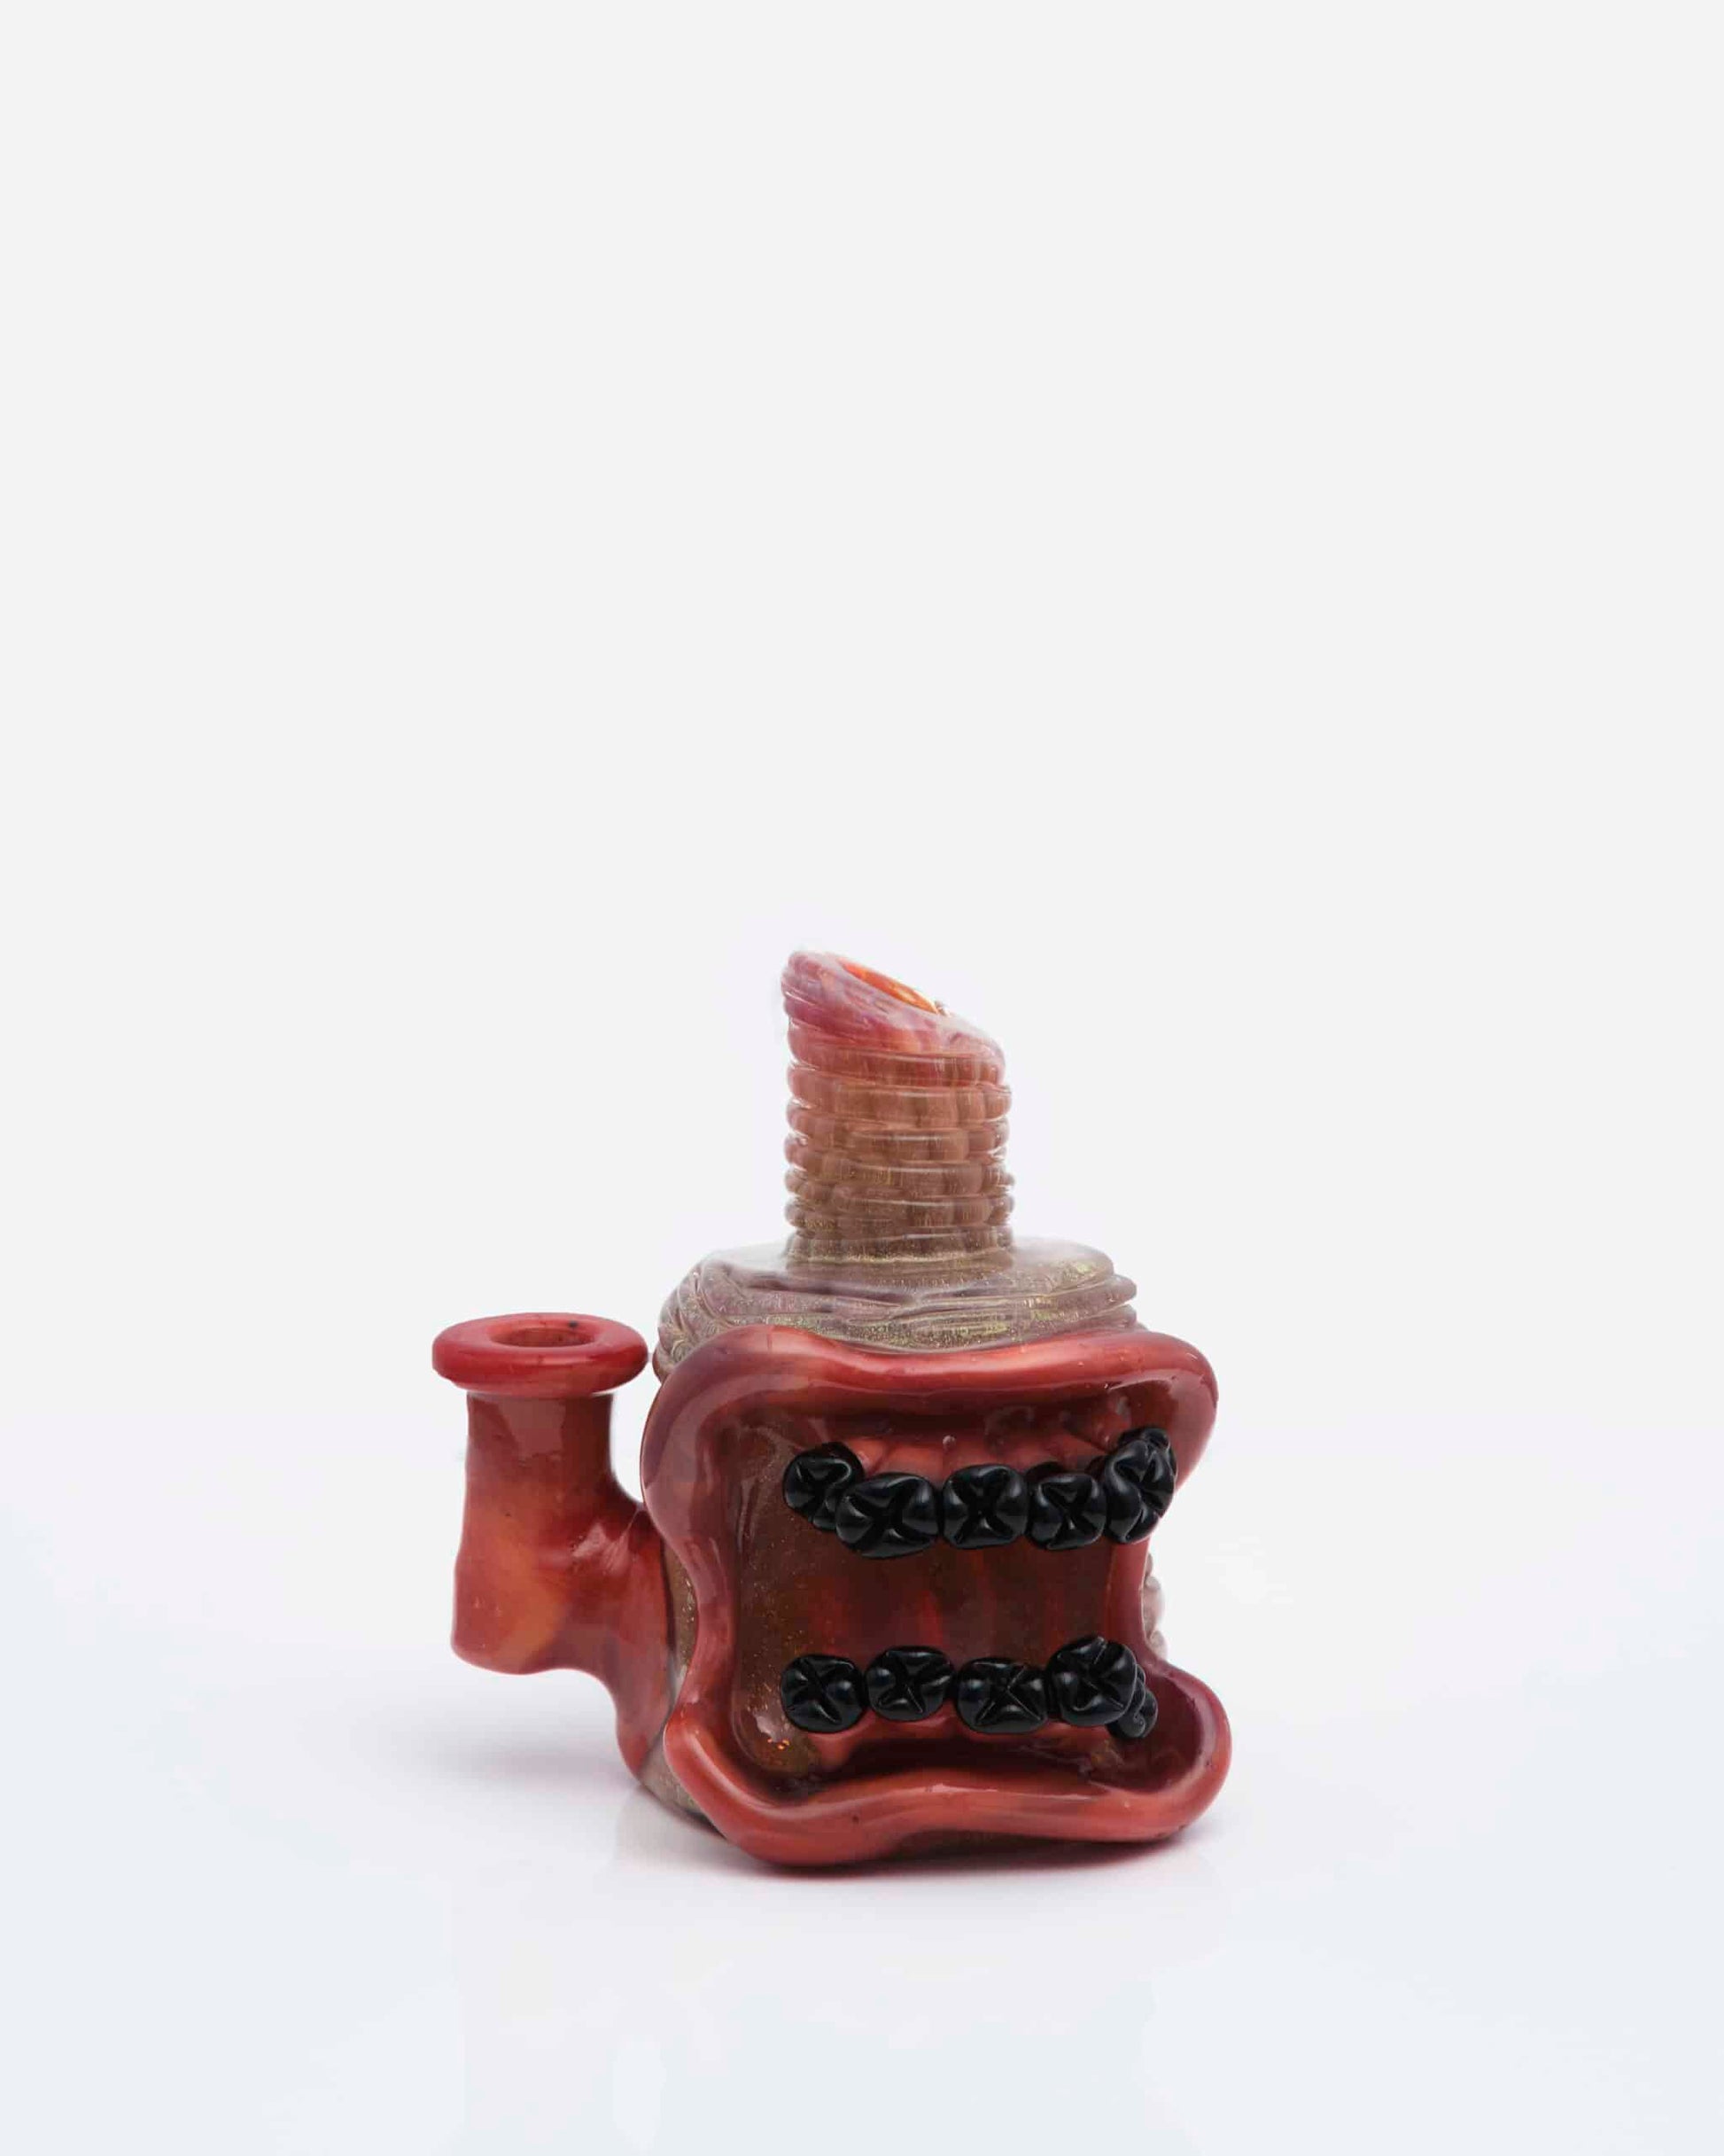 artisan-crafted design of the Mystery Dichro & Tequila Sunrise Mini Face Rig w/ Matching Carb Cap by FrostysFresh